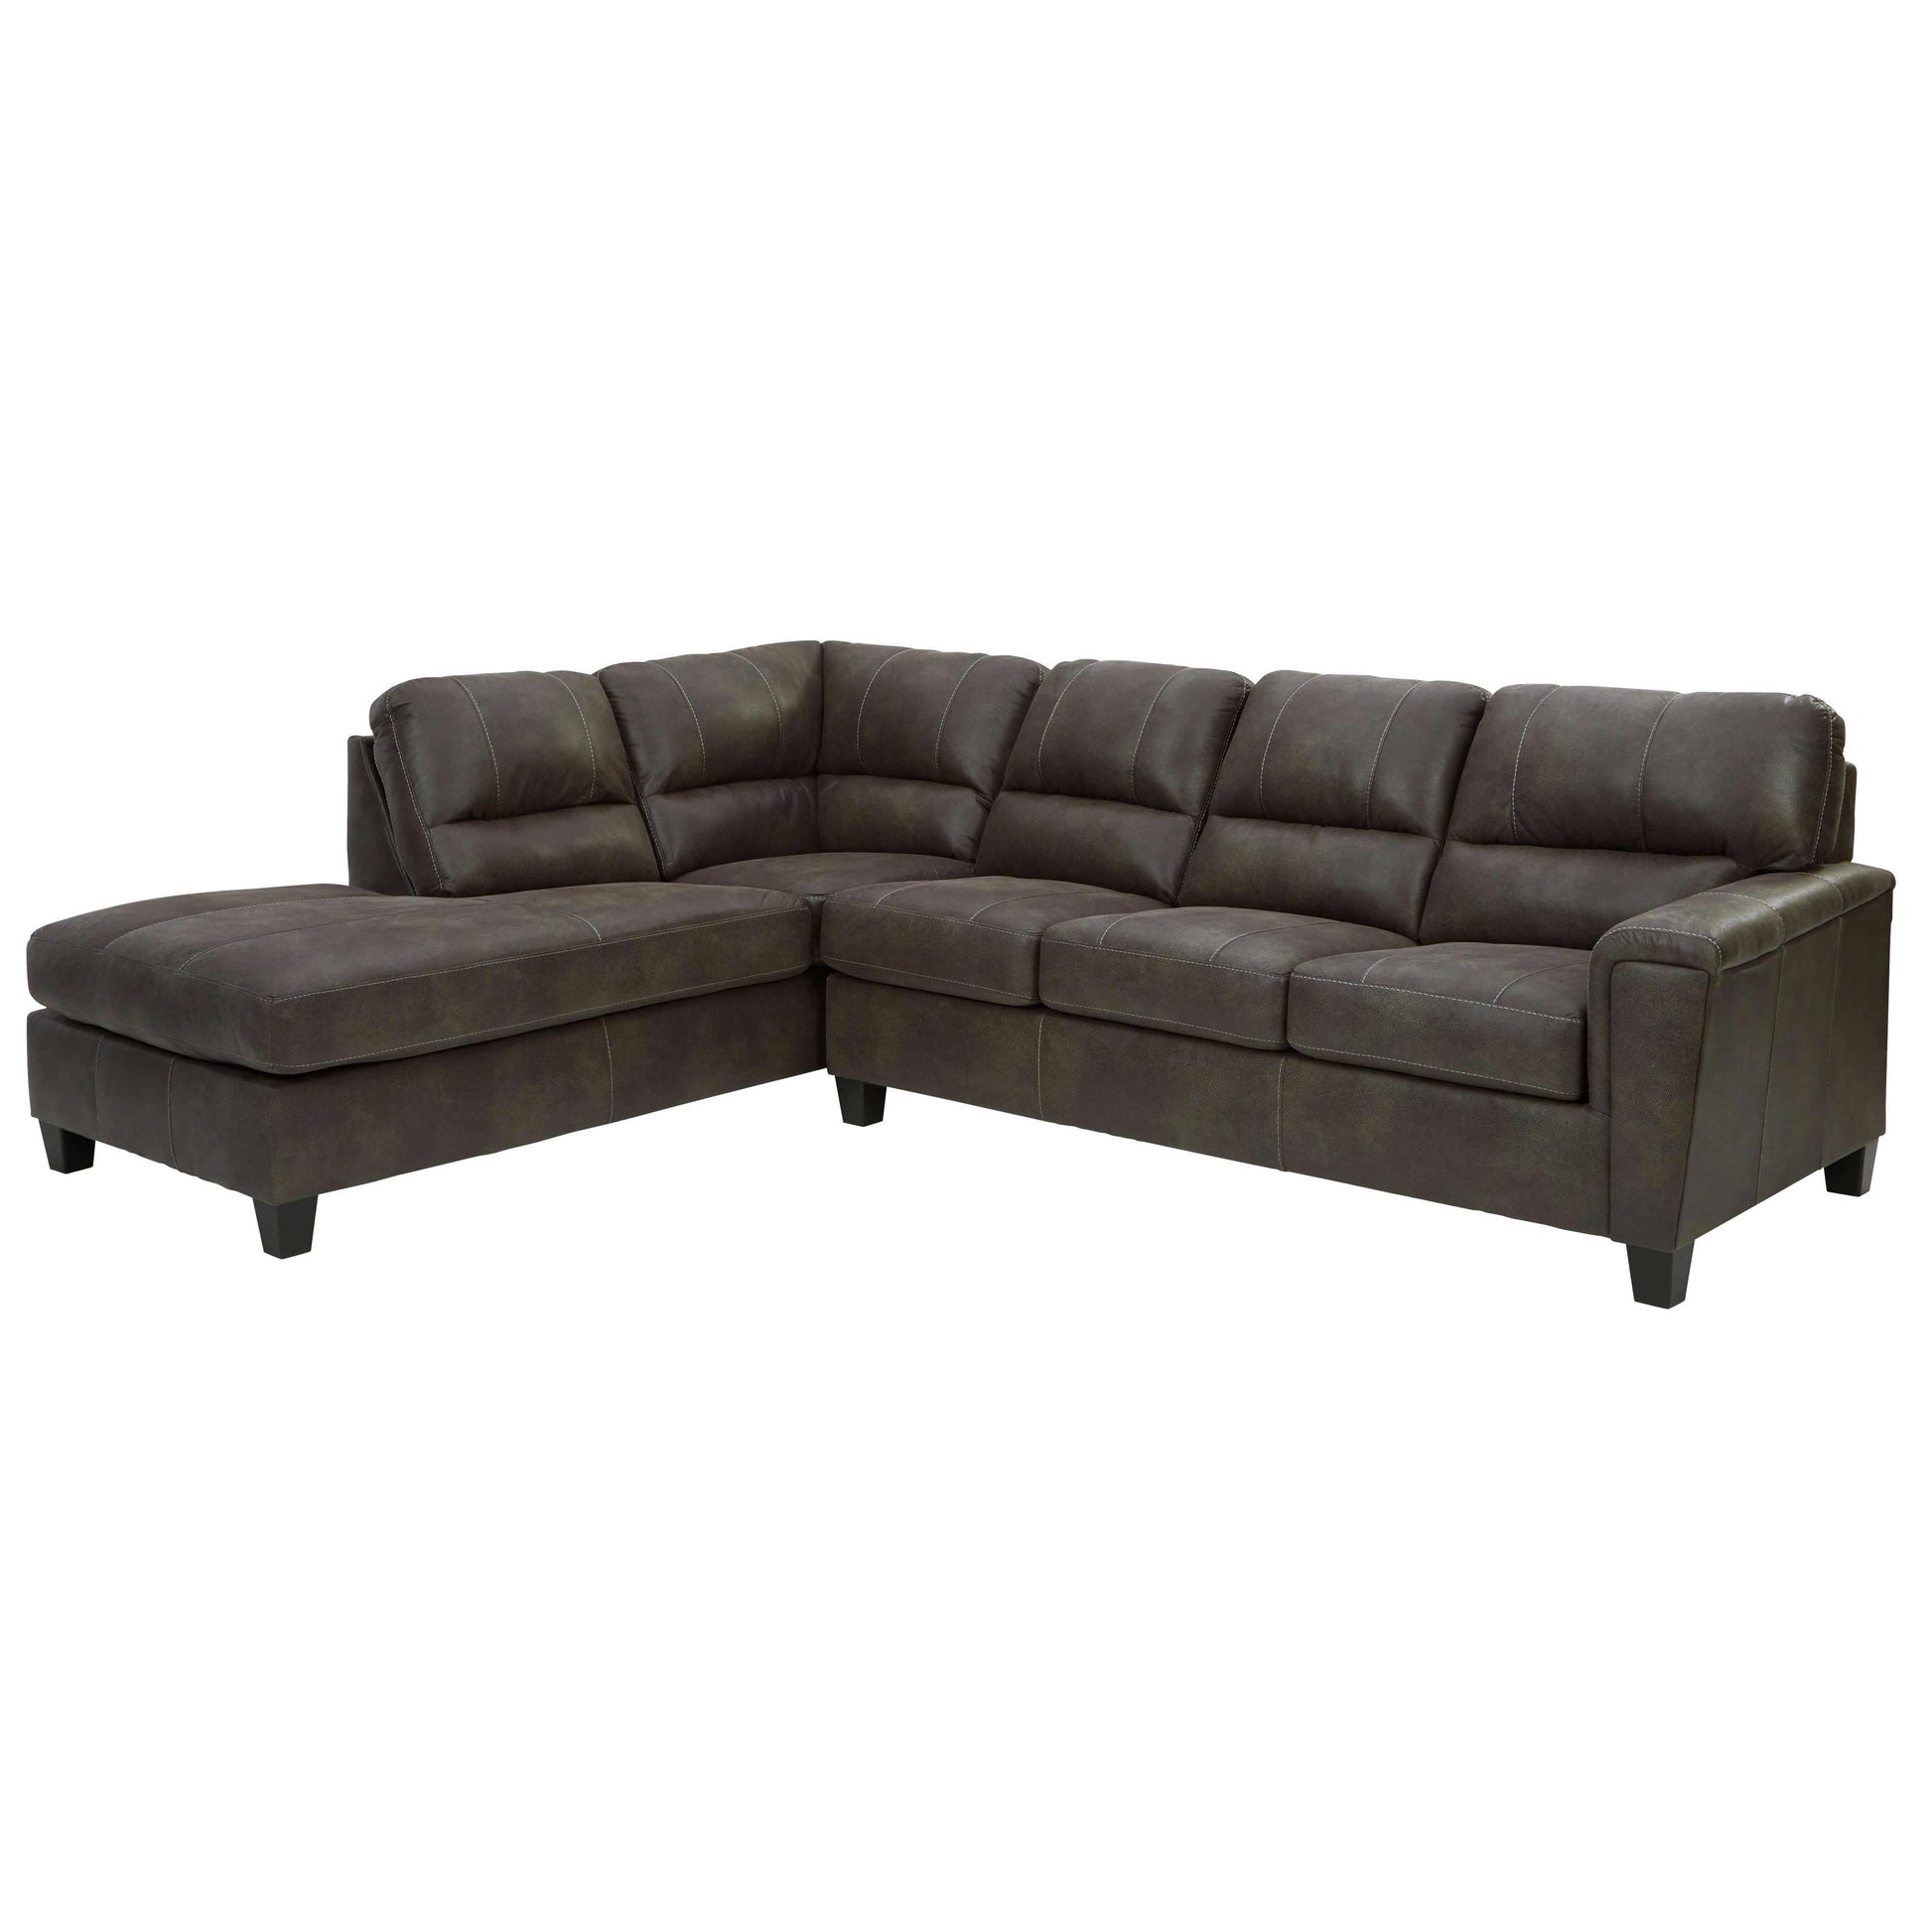 Signature Design by Ashley Navi Leather Look Sleeper Sectional 9400216/9400270